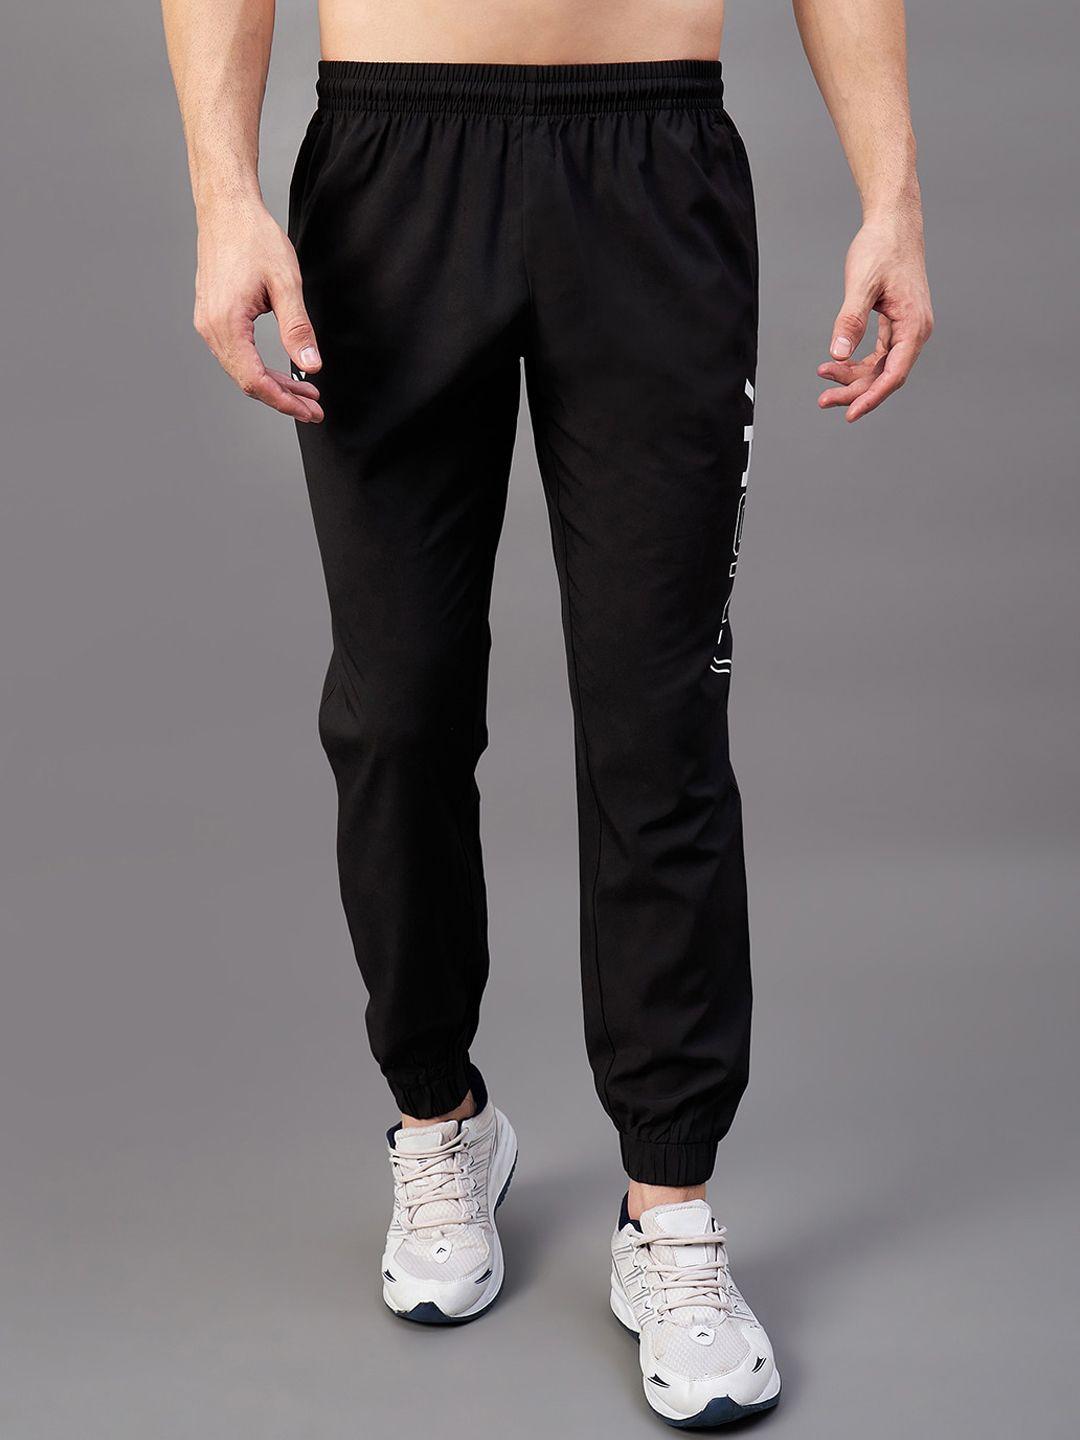 masch sports men mid-rise typography printed rapid-dry sports joggers